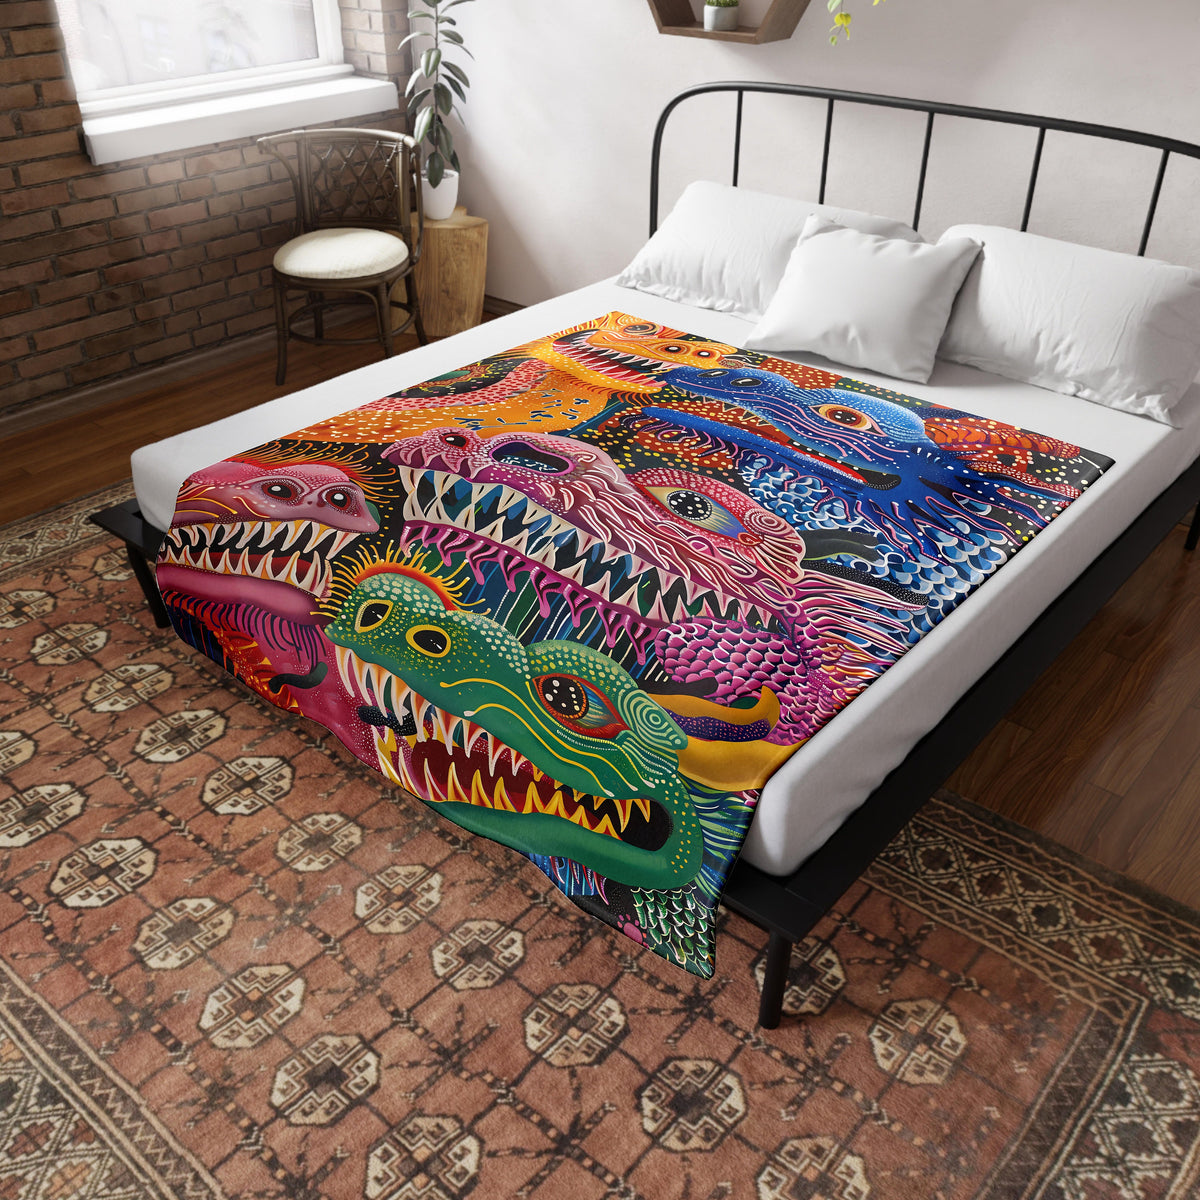 a bed with a colorful comforter on top of it